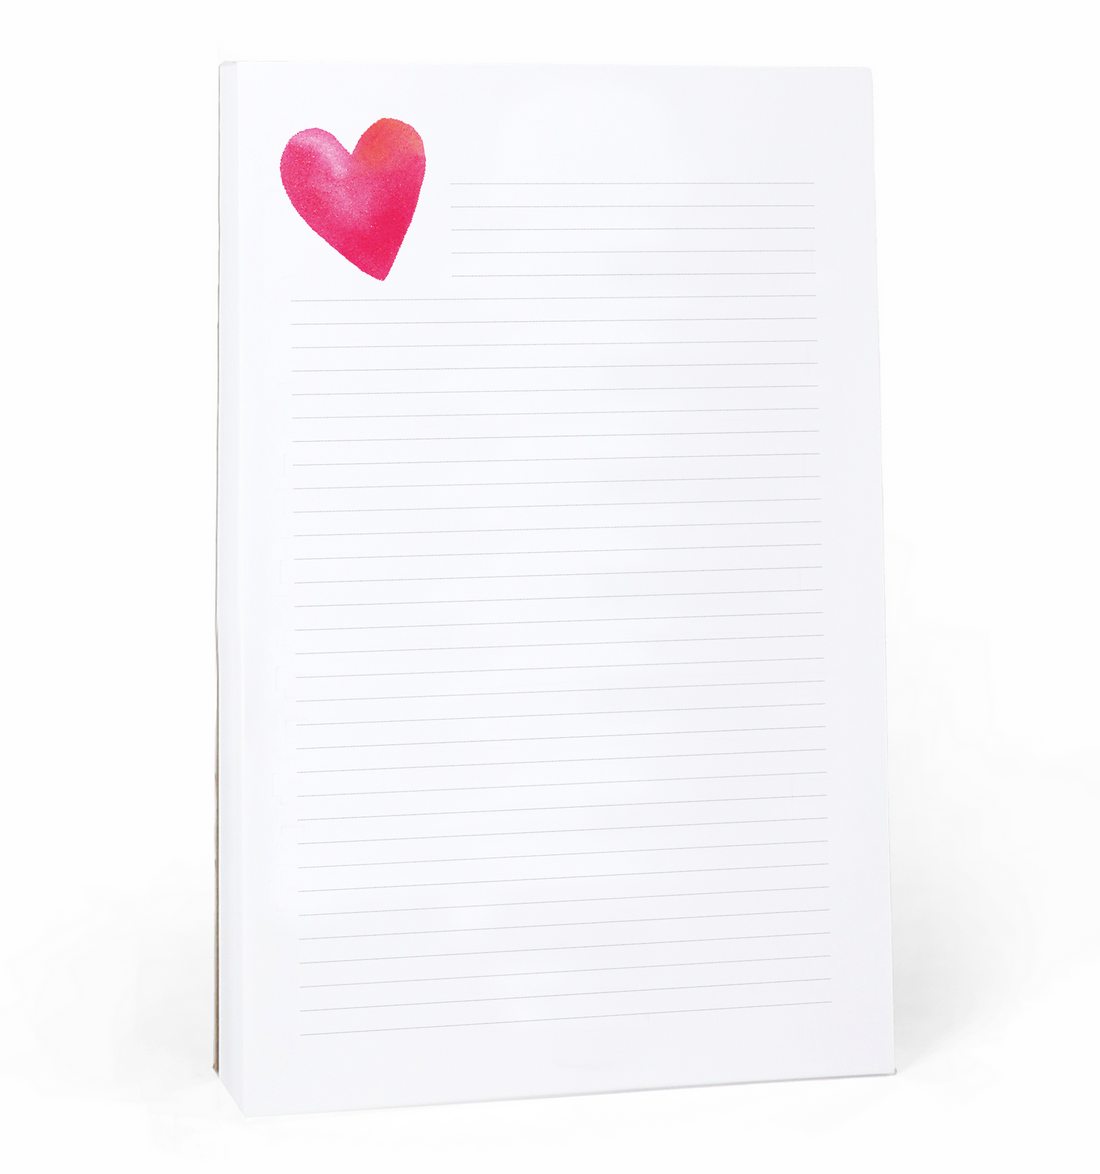 E. Frances Heart Lined Notepad with a pink heart sticker on the cover against a white background, accompanied by a pen.